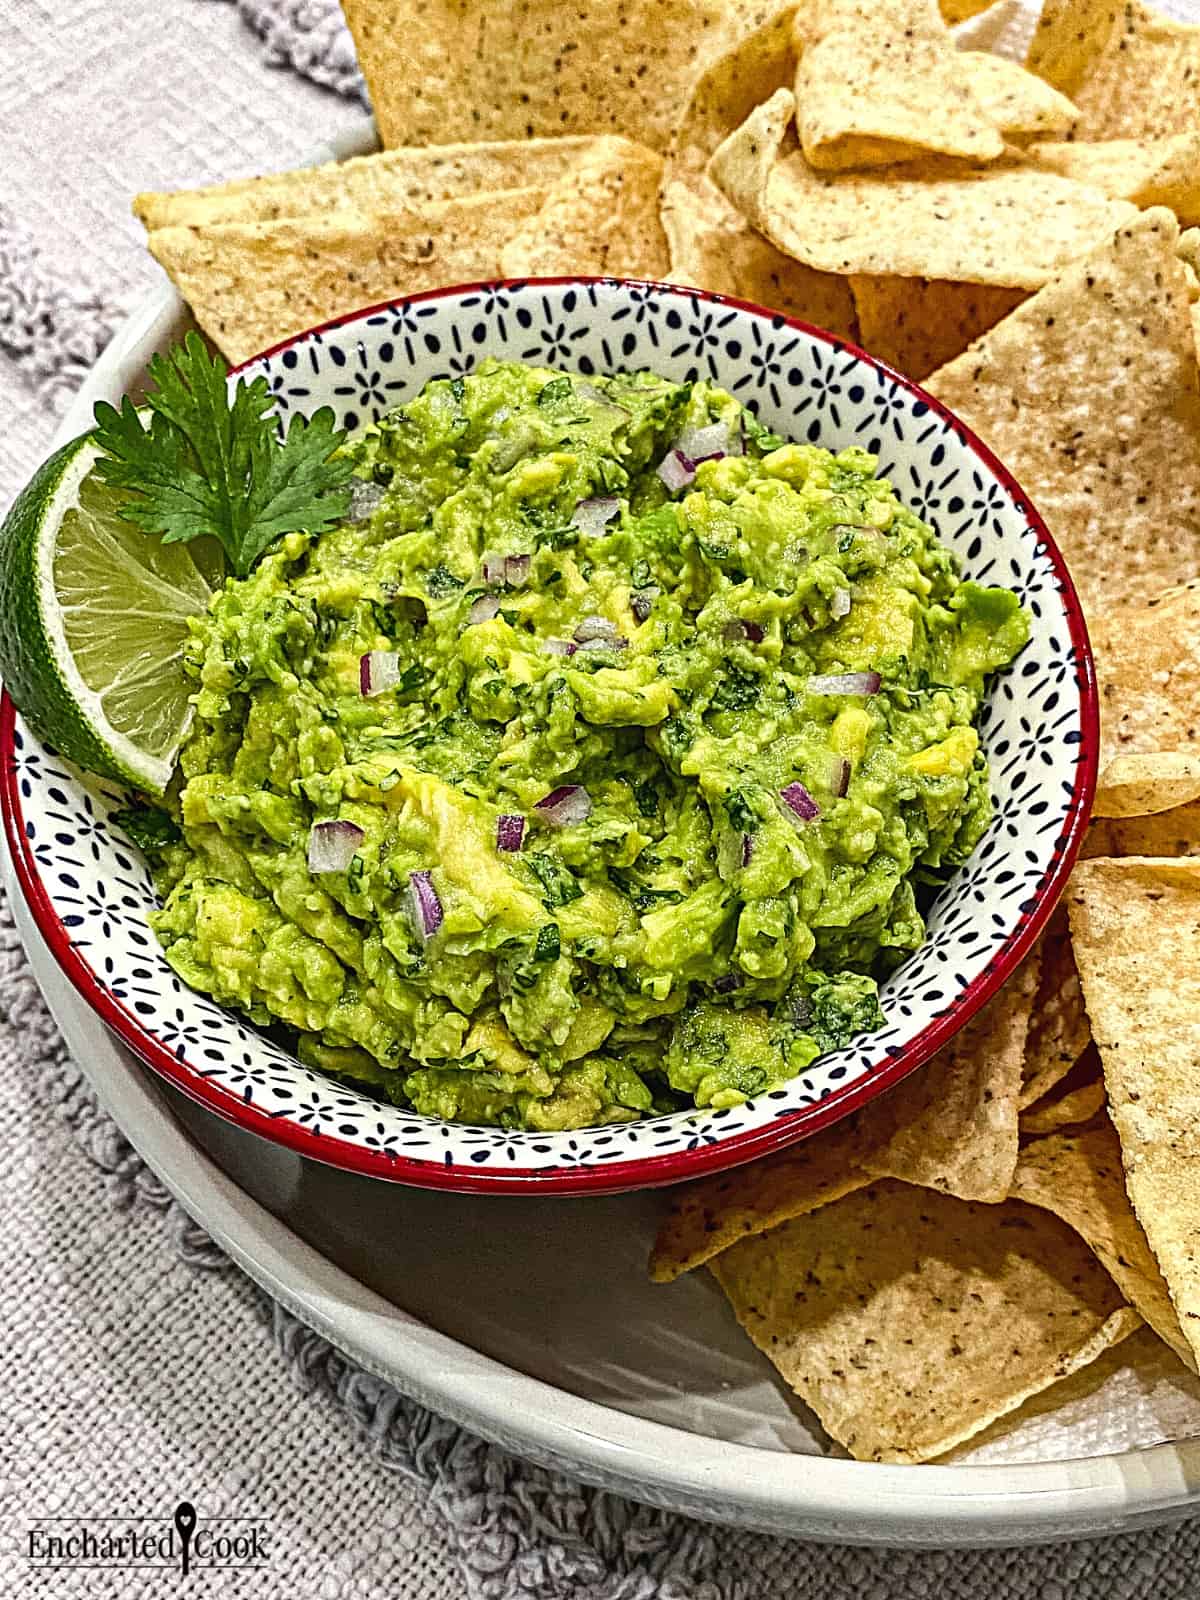 A bowl of freshly made green guacamole garnished with lime and cilantro with tortilla chips surrounding it.